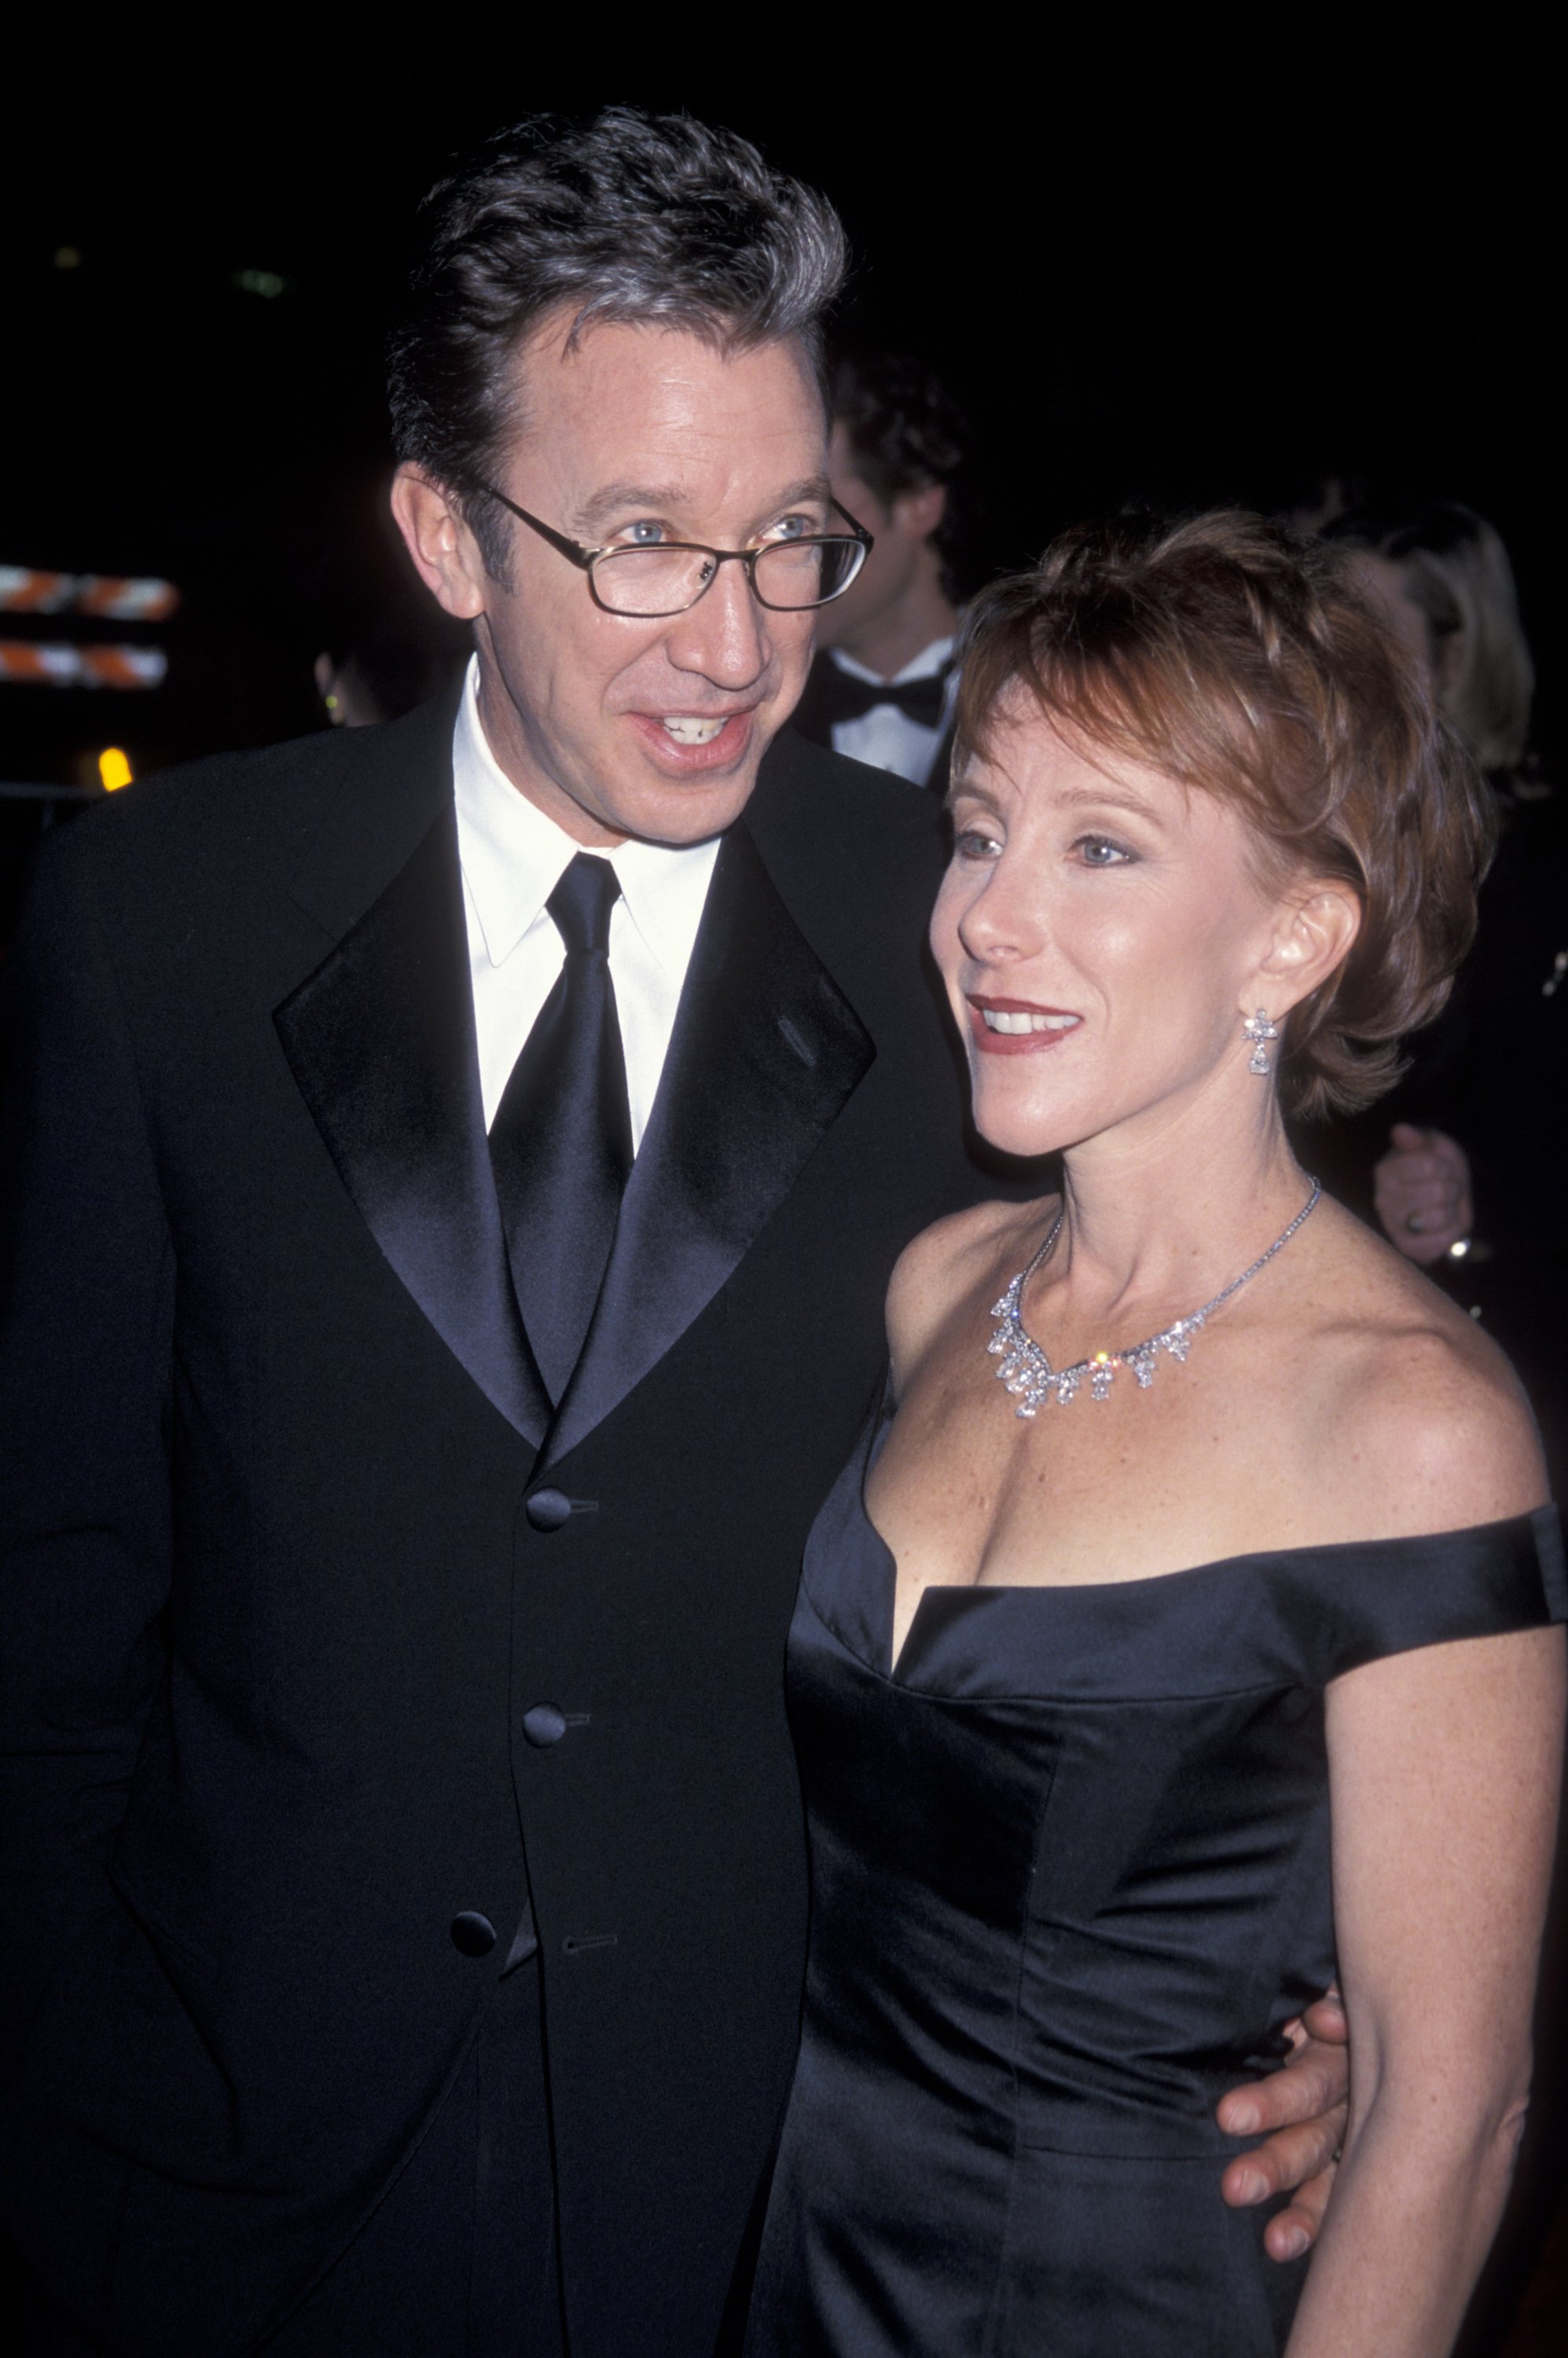 Tim Allen and Laura Diebel are pictured during The 25th Annual People's Choice Awards at Pasadena Civic Auditorium on an unspecified date, in Pasadena, California, United States | Source: Getty Images